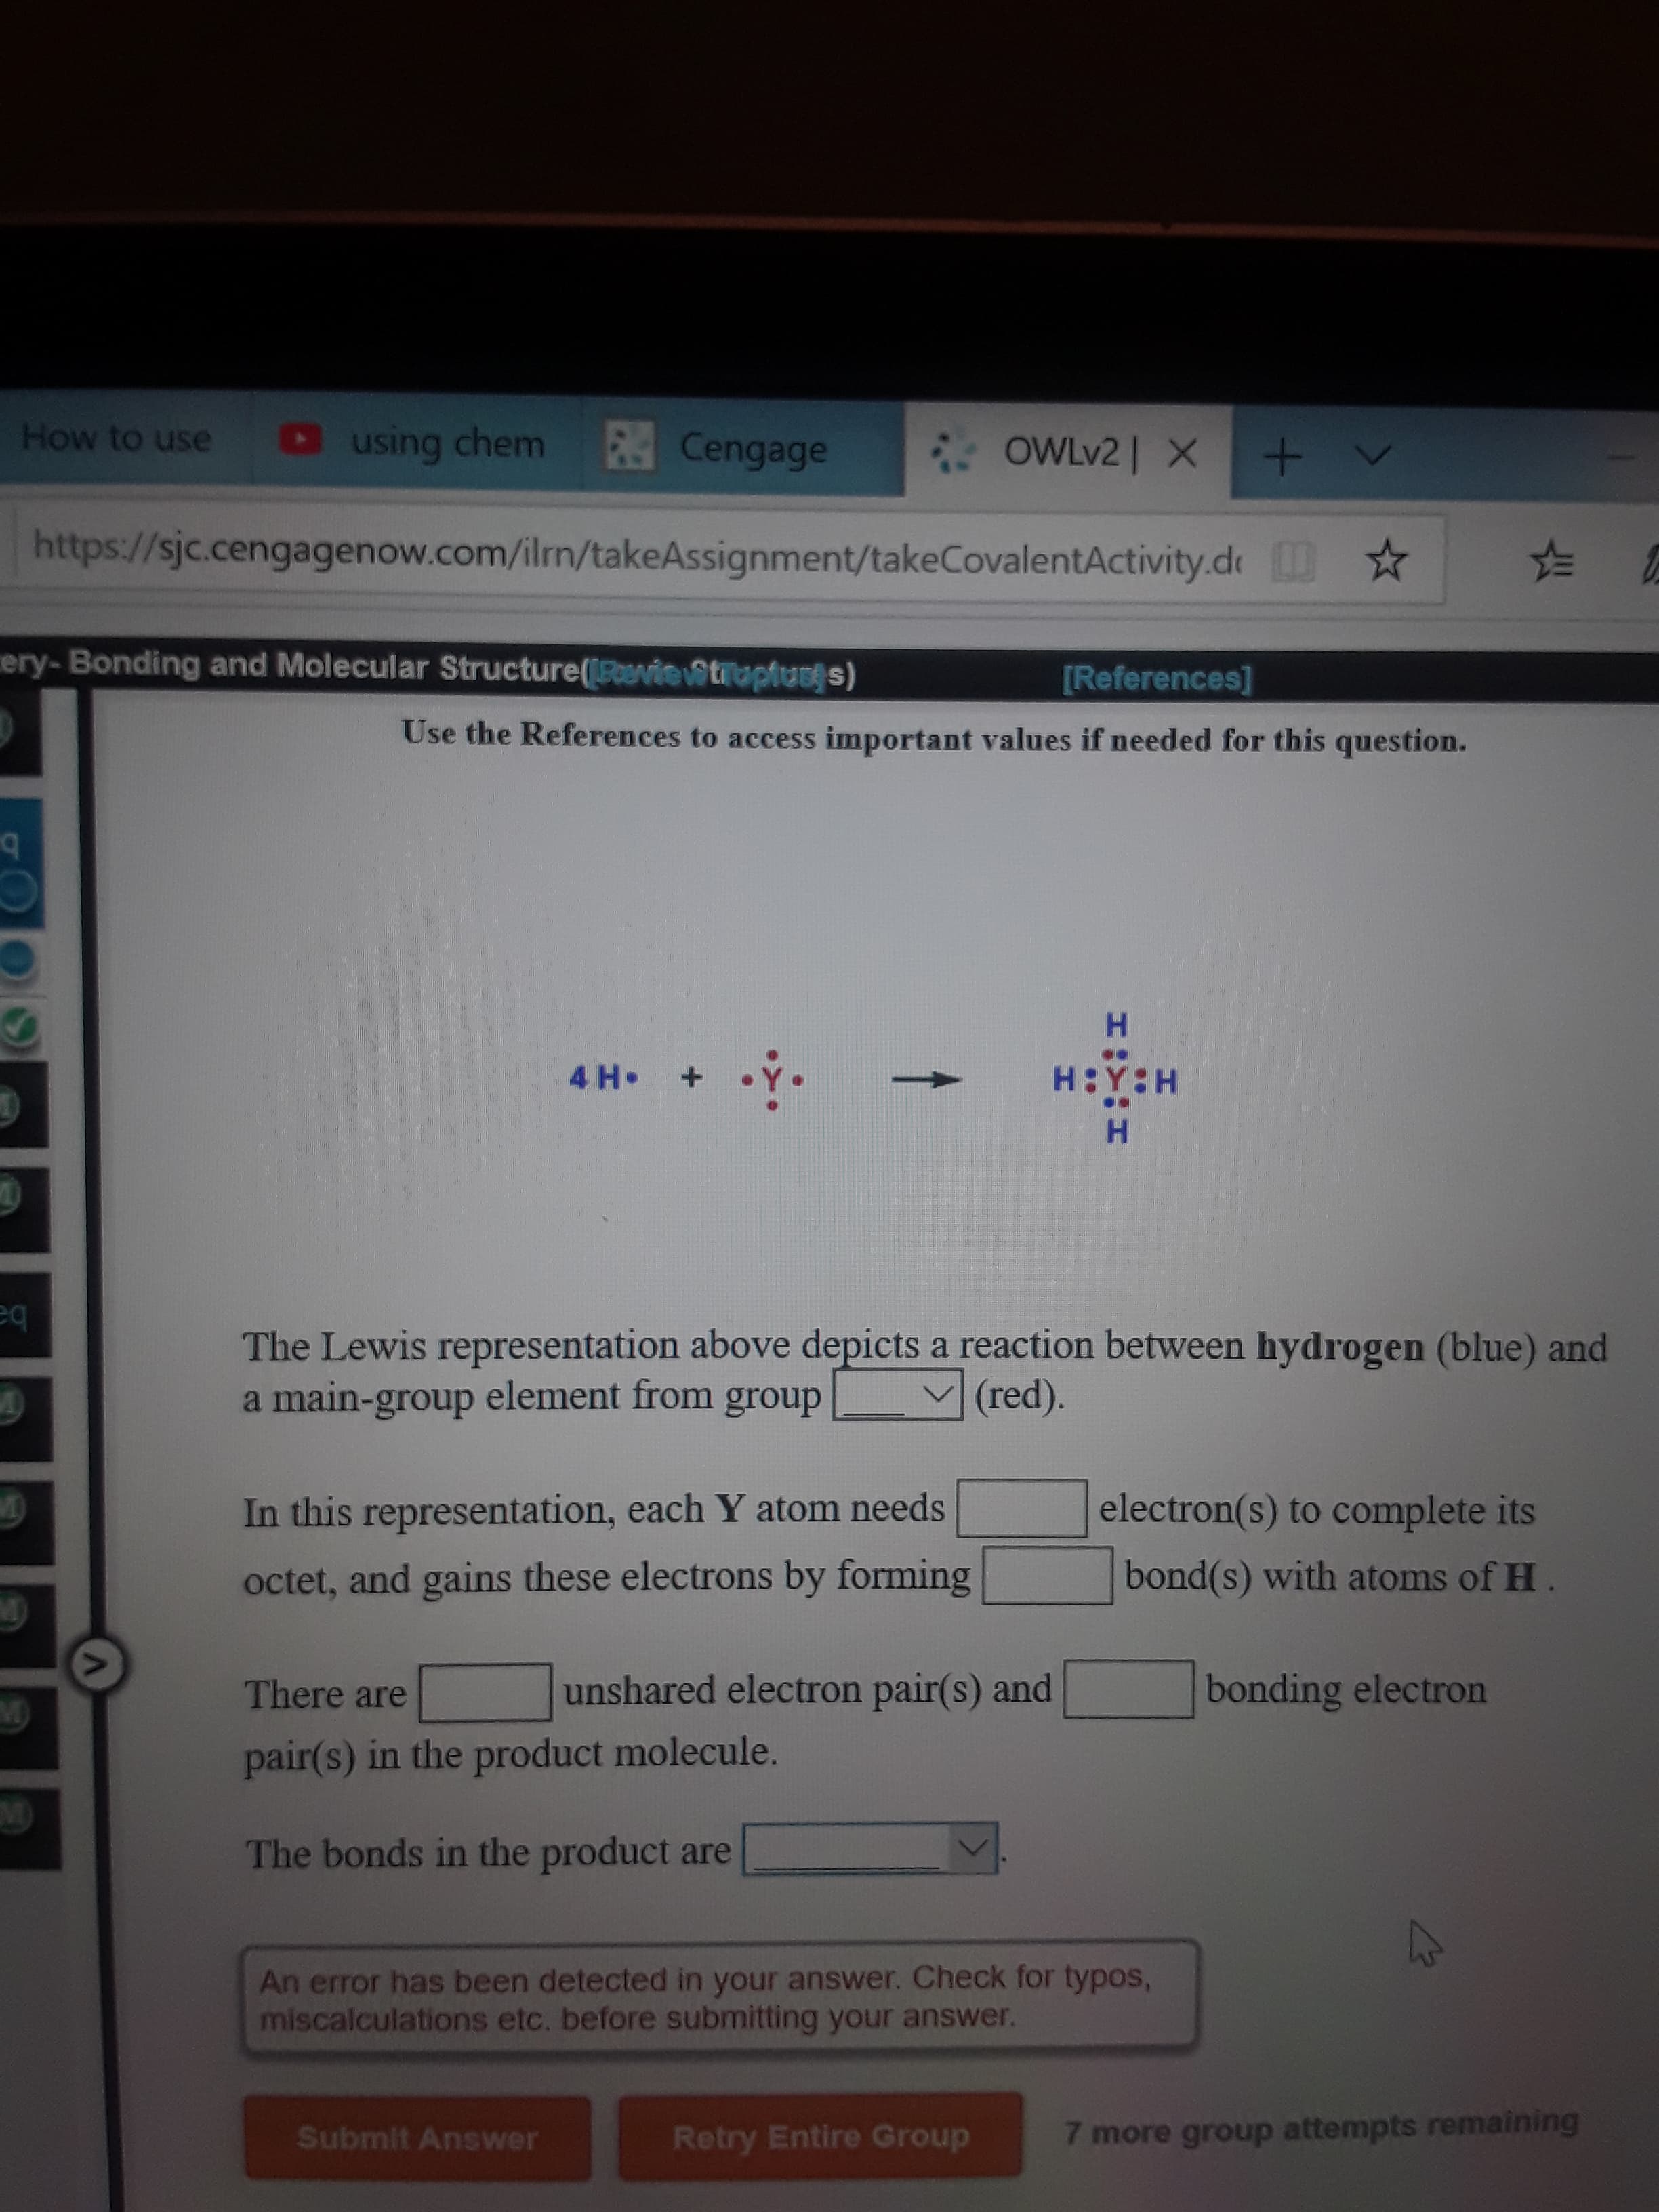 How to use
O using chem
Cengage
OWLV2| X+ V
https://sjc.cengagenow.com/iln/takeAssignment/takeCovalentActivity.de *
ery-Bonding and Molecular Structure(Poenie@truptuss)
[References]
Use the References to access important values if needed for this question.
H.
4 H•
H:Y:H
H.
eq
The Lewis representation above depicts a reaction between hydrogen (blue) and
a main-group element from group
(red).
In this representation, each Y atom needs
electron(s) to complete its
octet, and gains these electrons by forming
bond(s) with atoms of H.
There are
unshared electron pair(s) and
bonding electron
pair(s) in the product molecule.
M)
The bonds in the product are
An error has been detected in your answer. Check for typos,
miscalculations etc. before submitting your answer.
Submit Answer
Retry Entire Group
7 more group attempts remaining
:-
